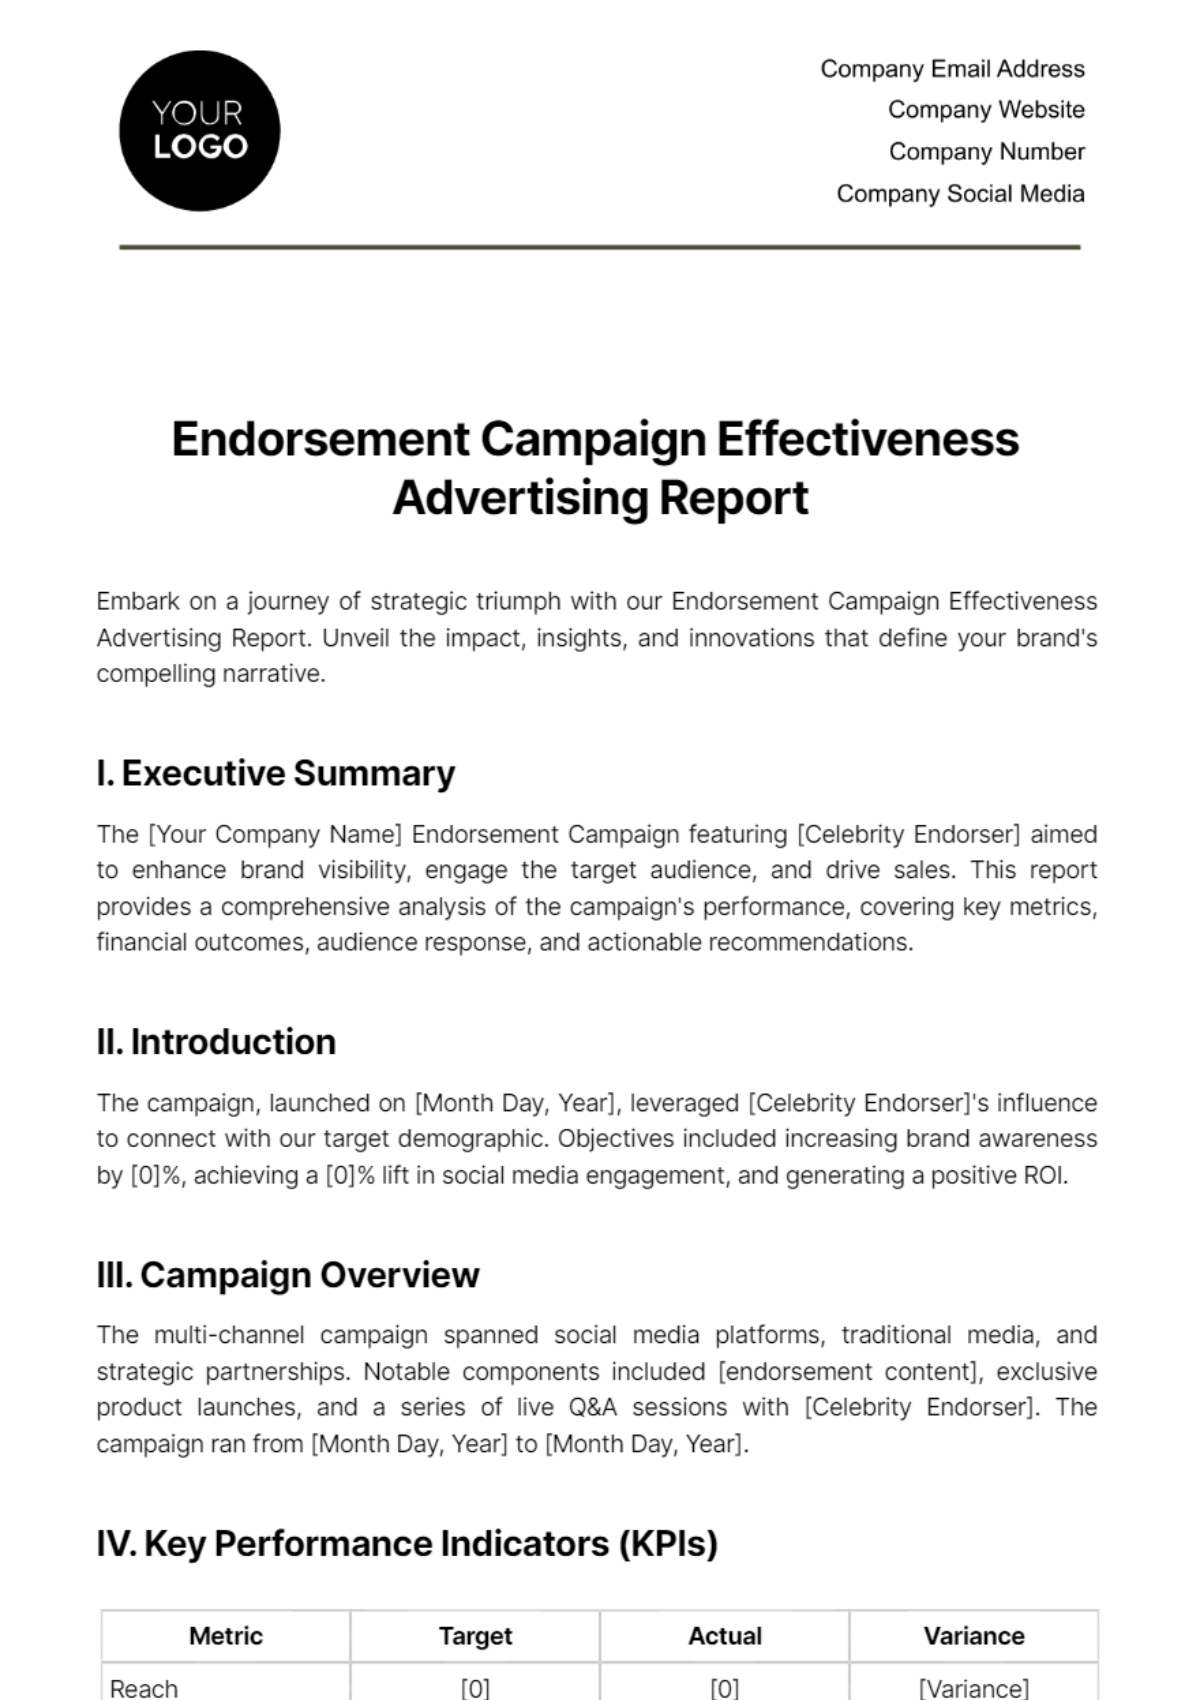 Free Endorsement Campaign Effectiveness Advertising Report Template 